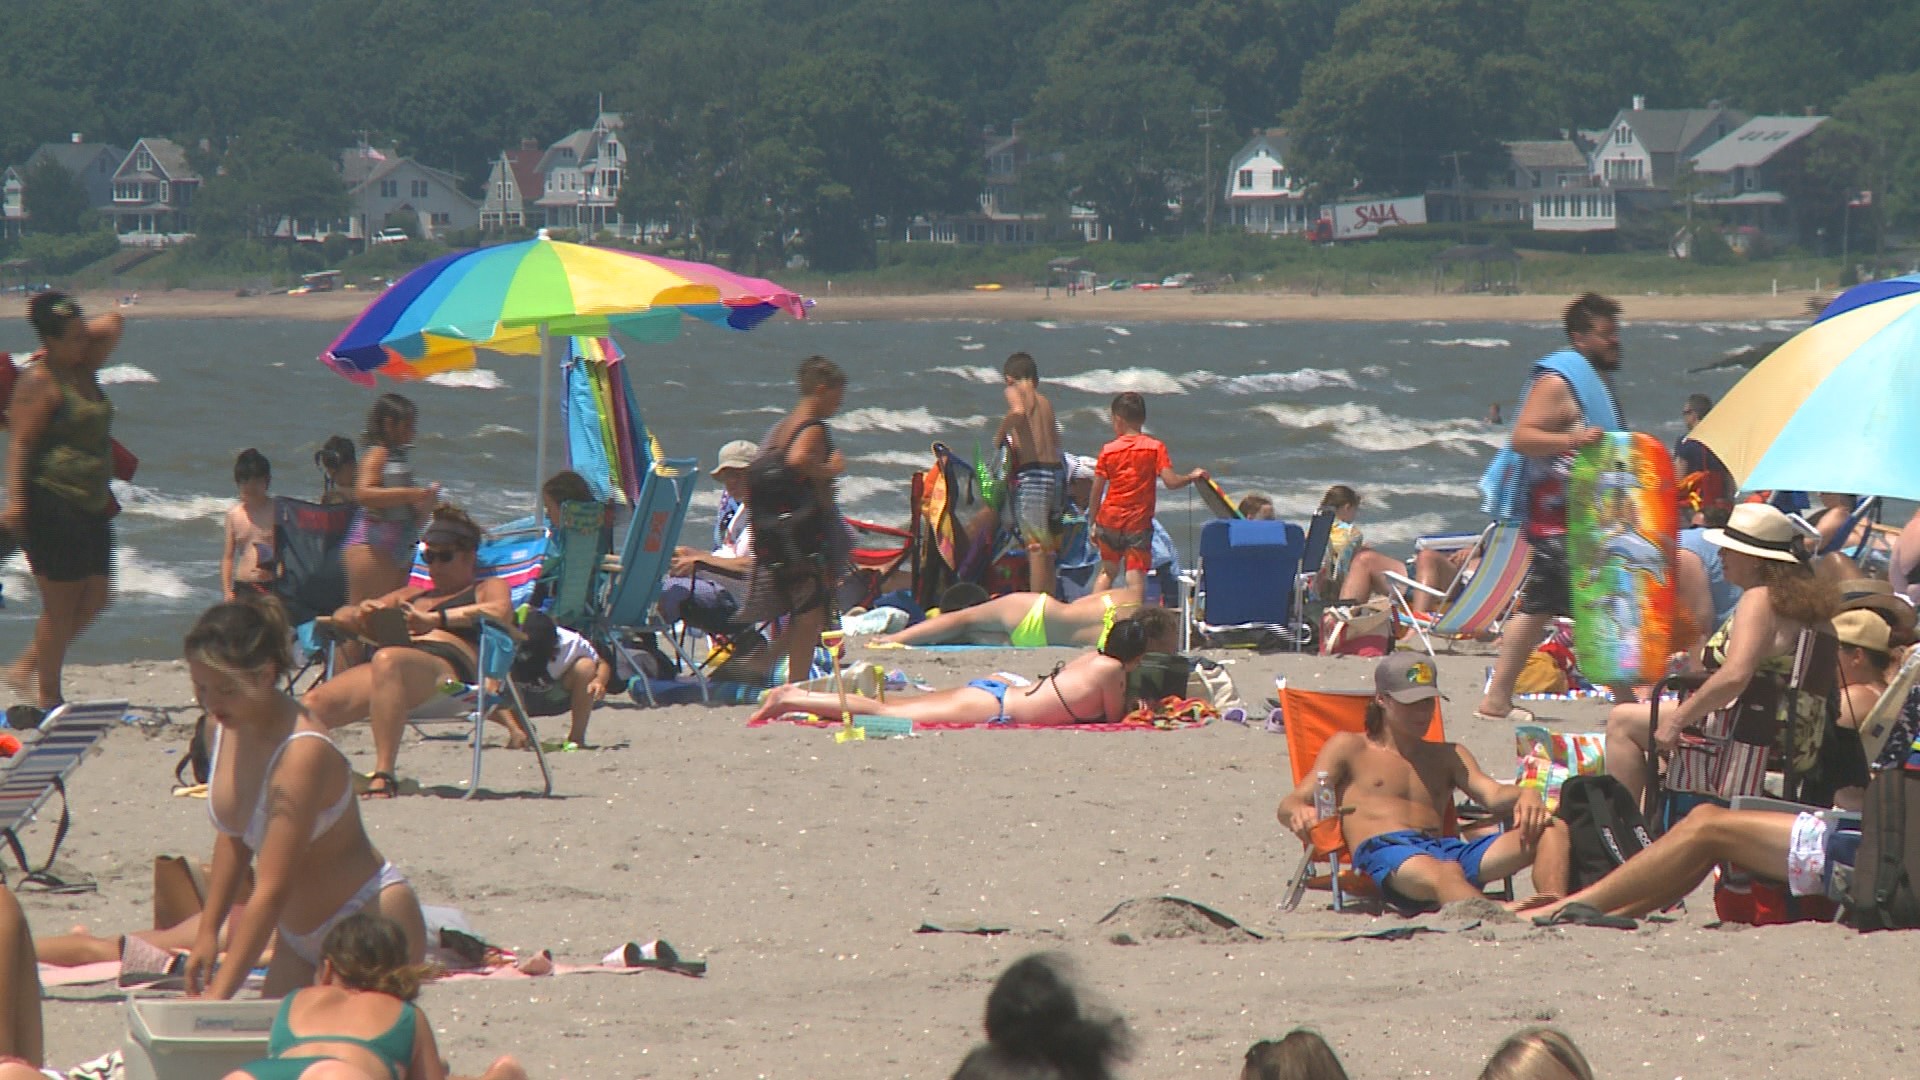 It's expected to be a beautiful Labor Day Weekend to close out the summer, but the lifeguards will not be on duty after Monday.